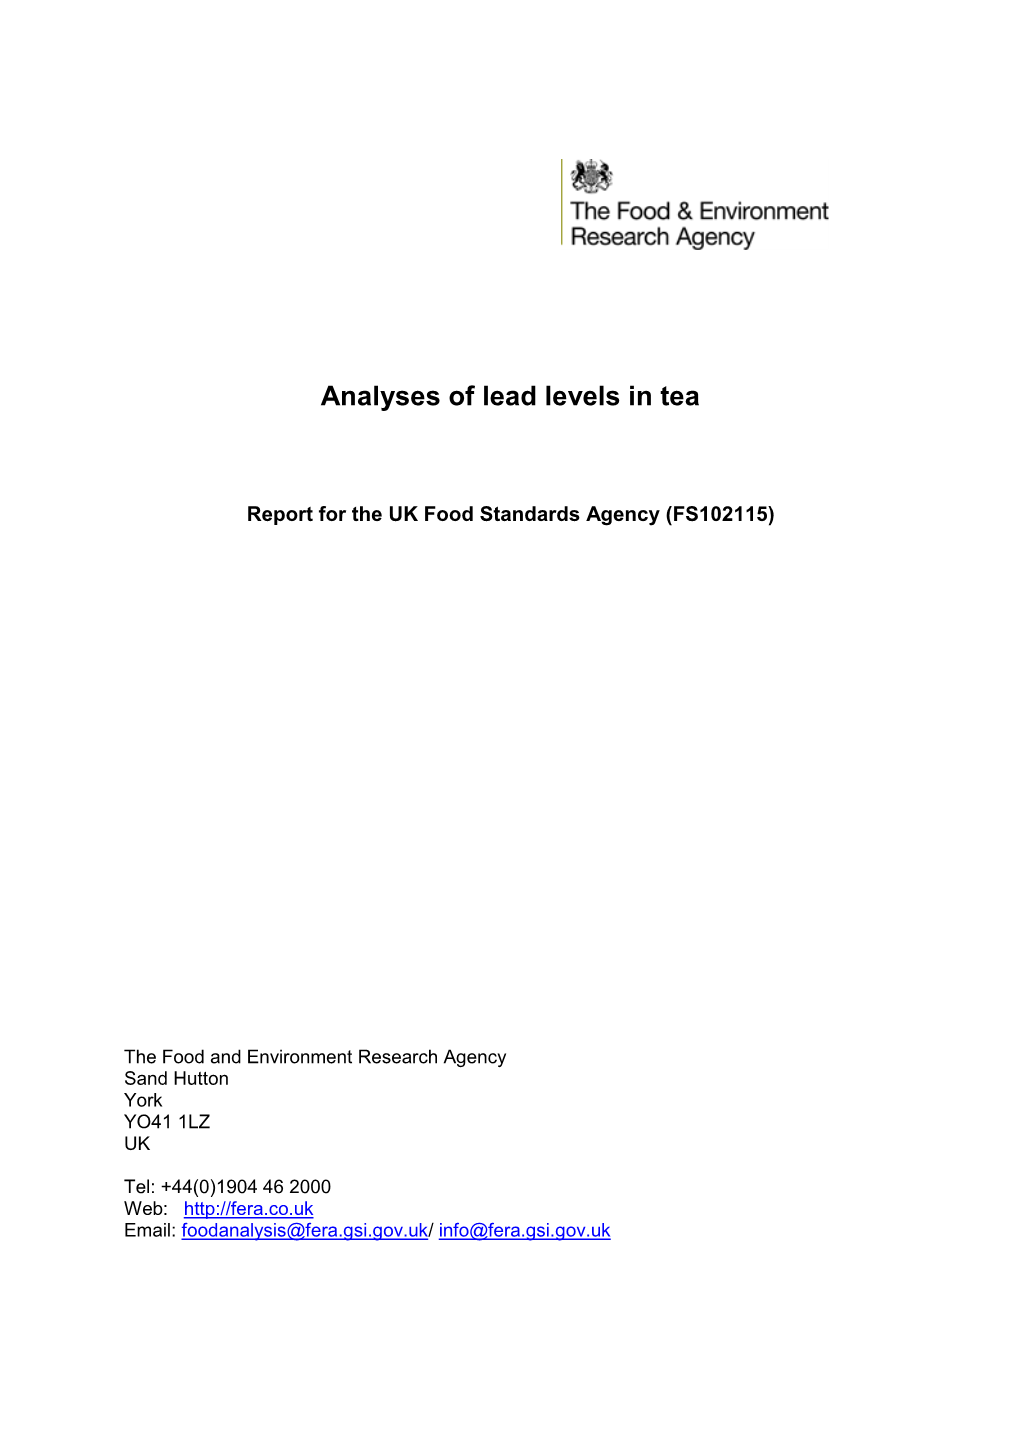 Analyses of Lead Levels in Tea